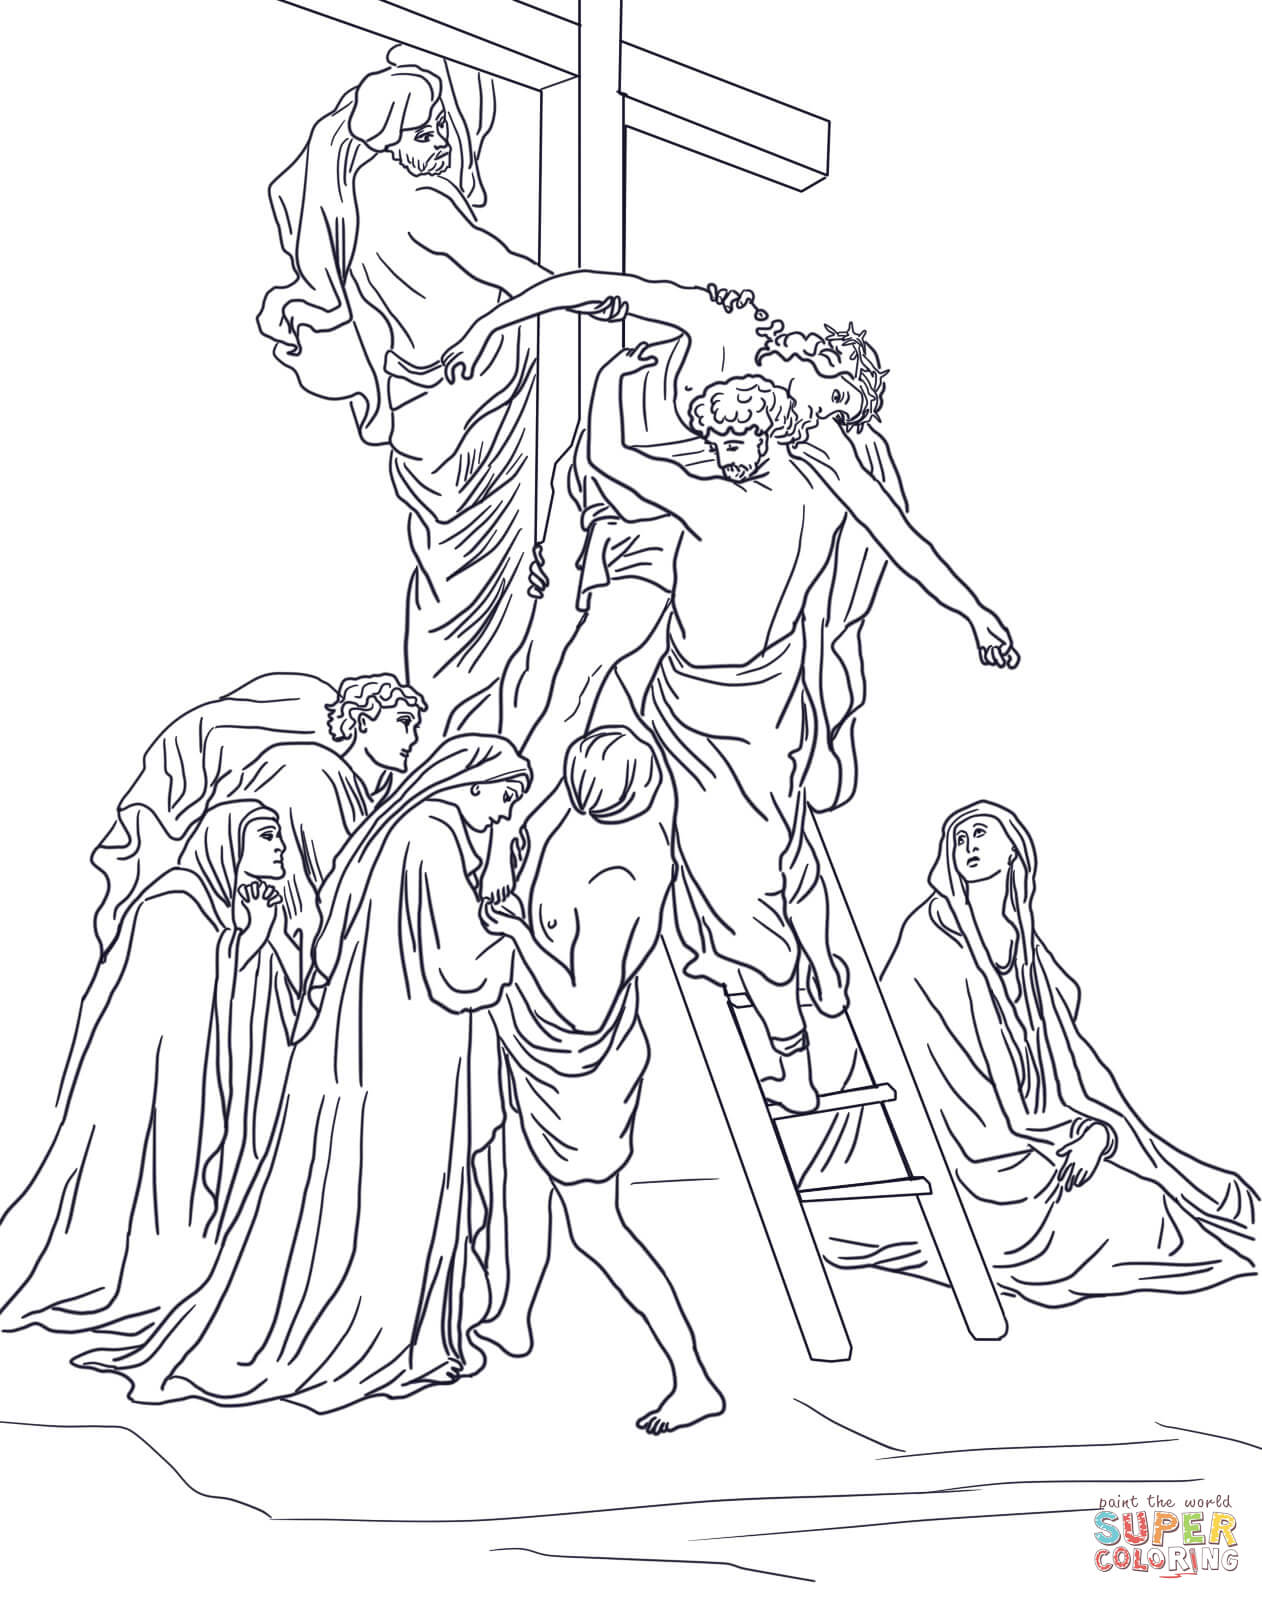 Thirteenth Station - Jesus is Taken Down from the Cross coloring page |  Free Printable Coloring Pages